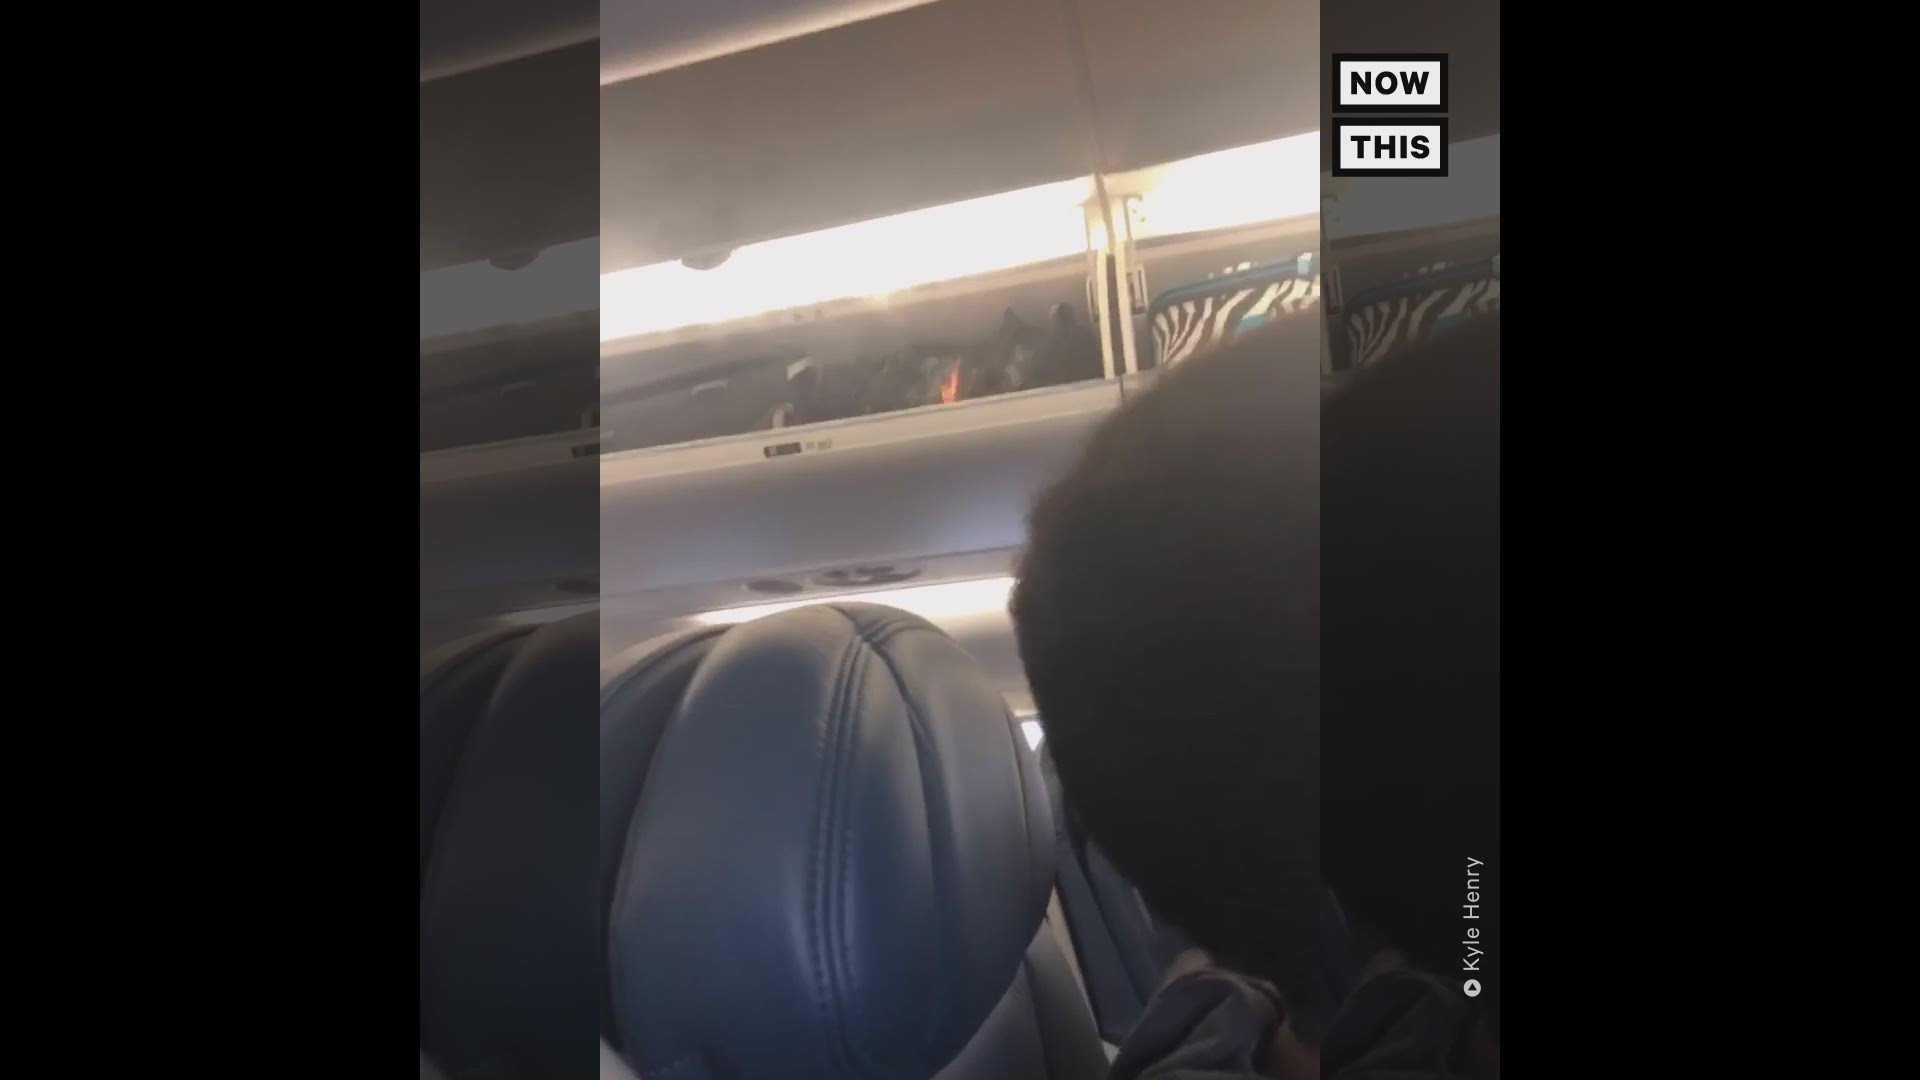 Passengers aboard a Delta flight headed to Houston had to deplane the aircraft Wednesday after a vape pen caught fire in someone’s carry-on luggage.